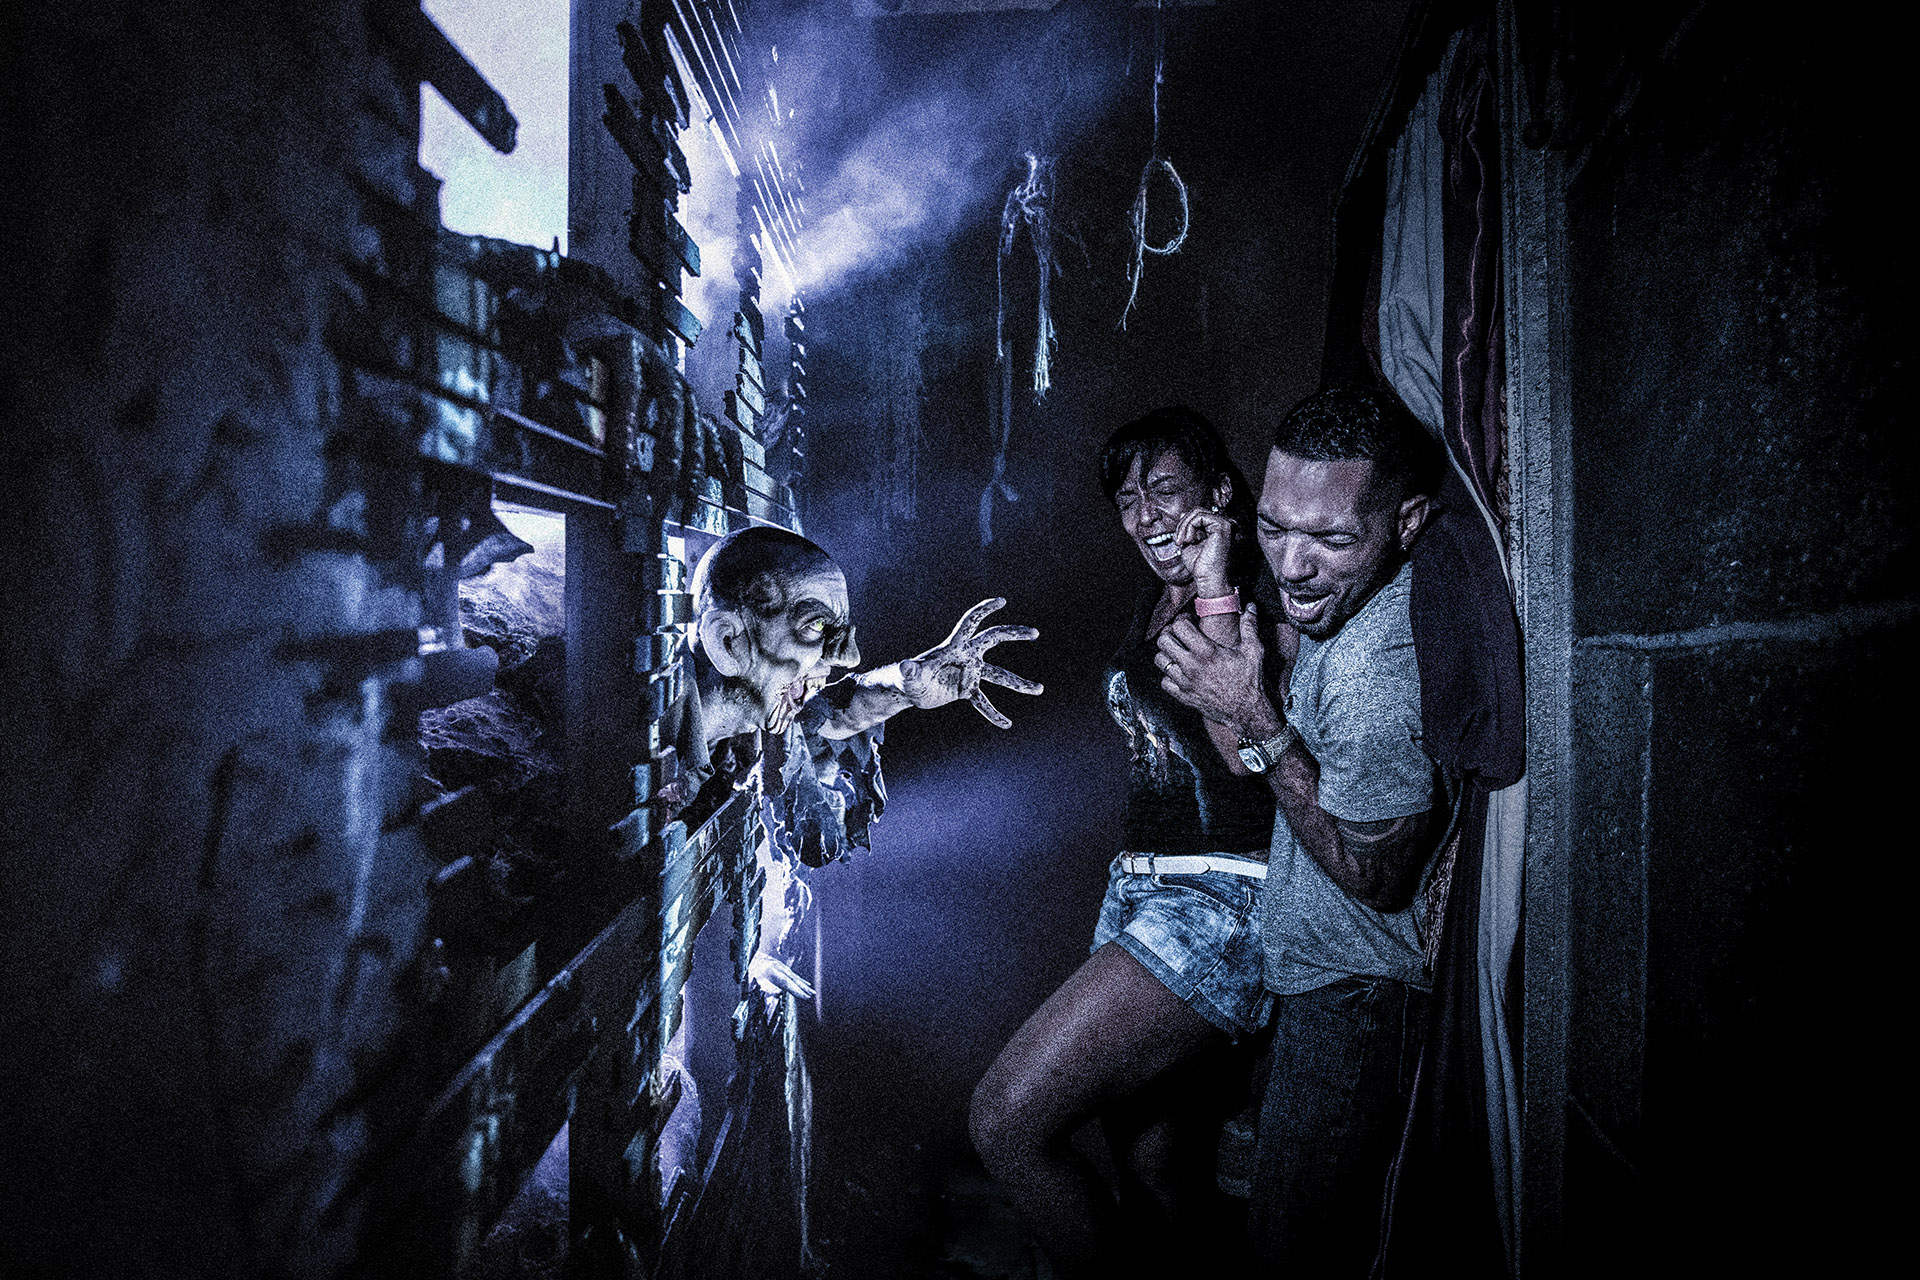 Limited-Time Ticket Offer Now on Sale for Universal Orlando’s Halloween Horror Nights